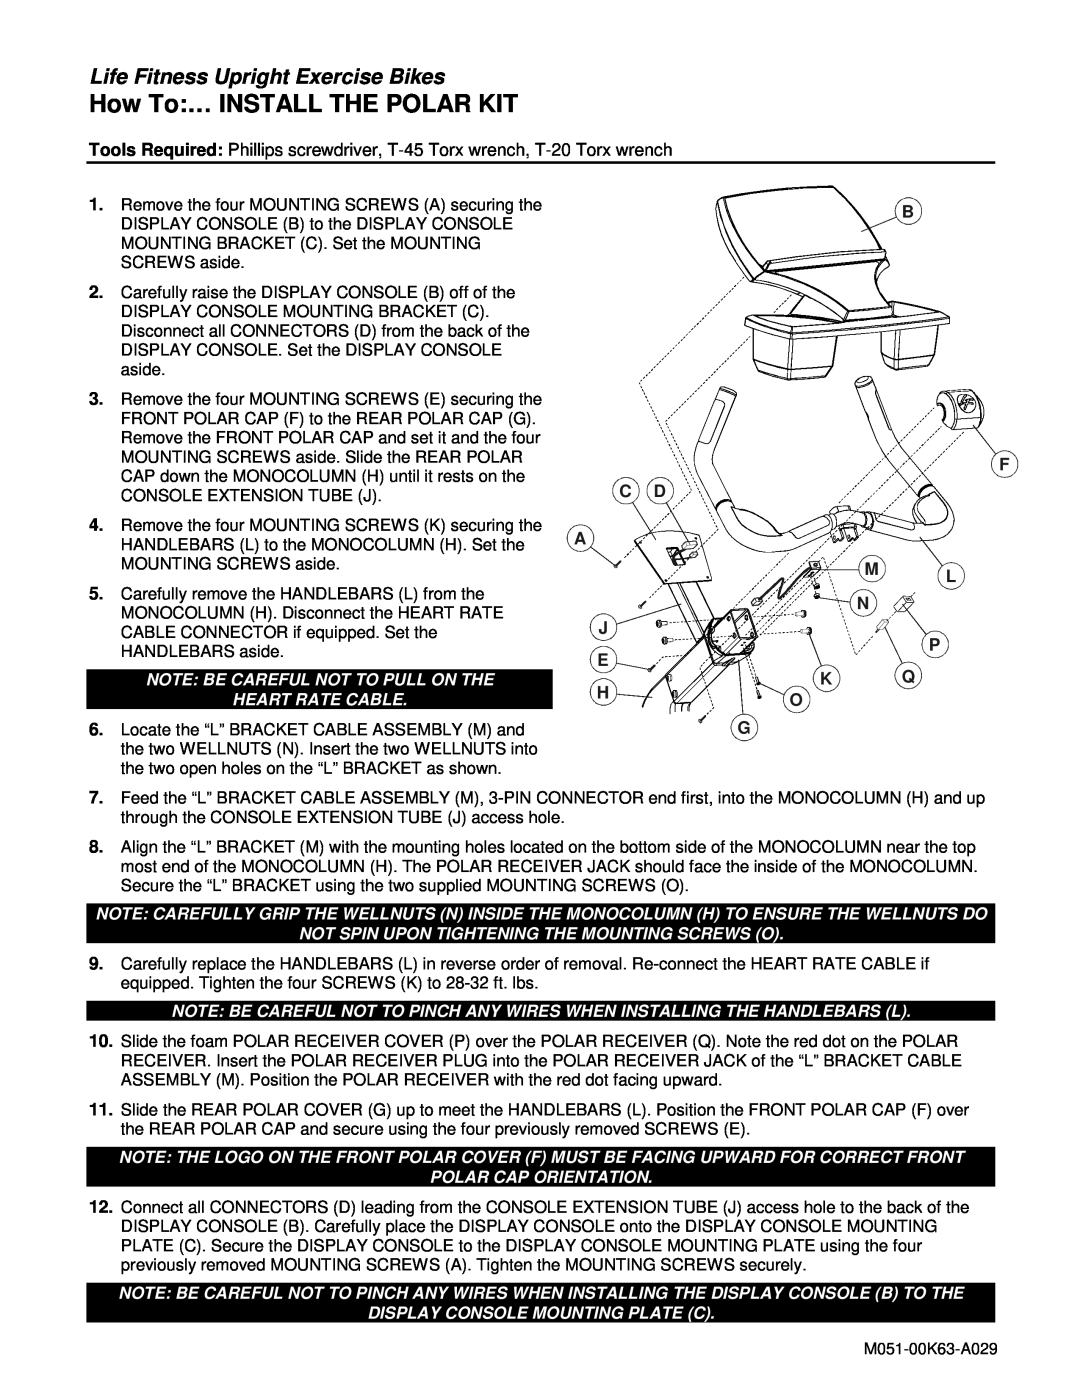 Life Fitness manual How To… INSTALL THE POLAR KIT, Life Fitness Upright Exercise Bikes 